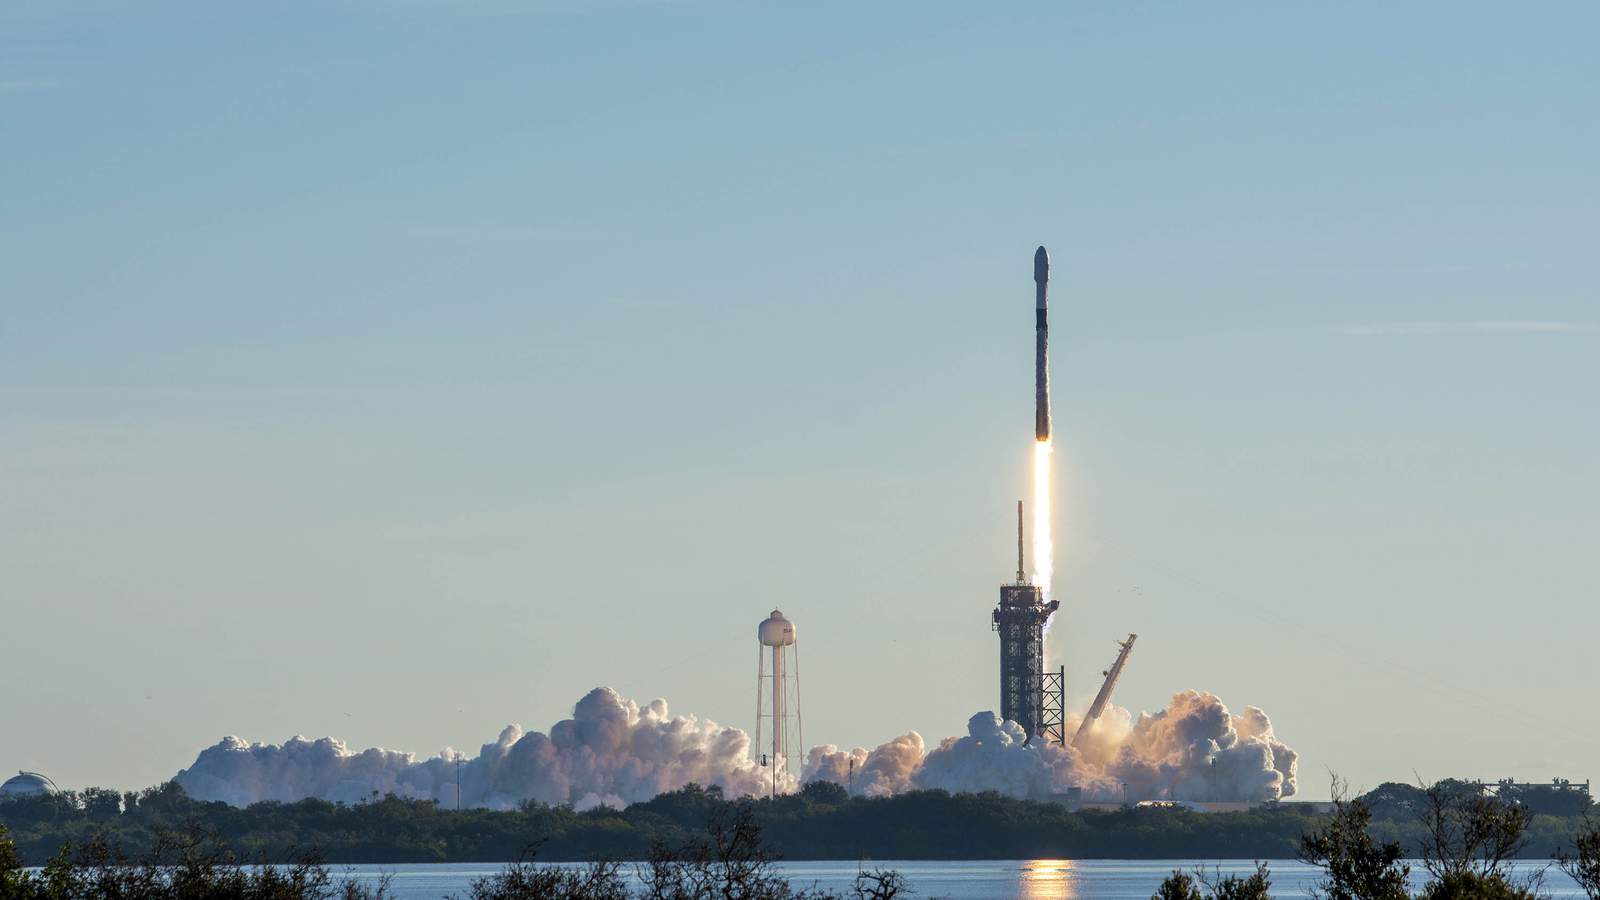 SpaceX is ready for the 2nd launch this week with a ride-sharing mission